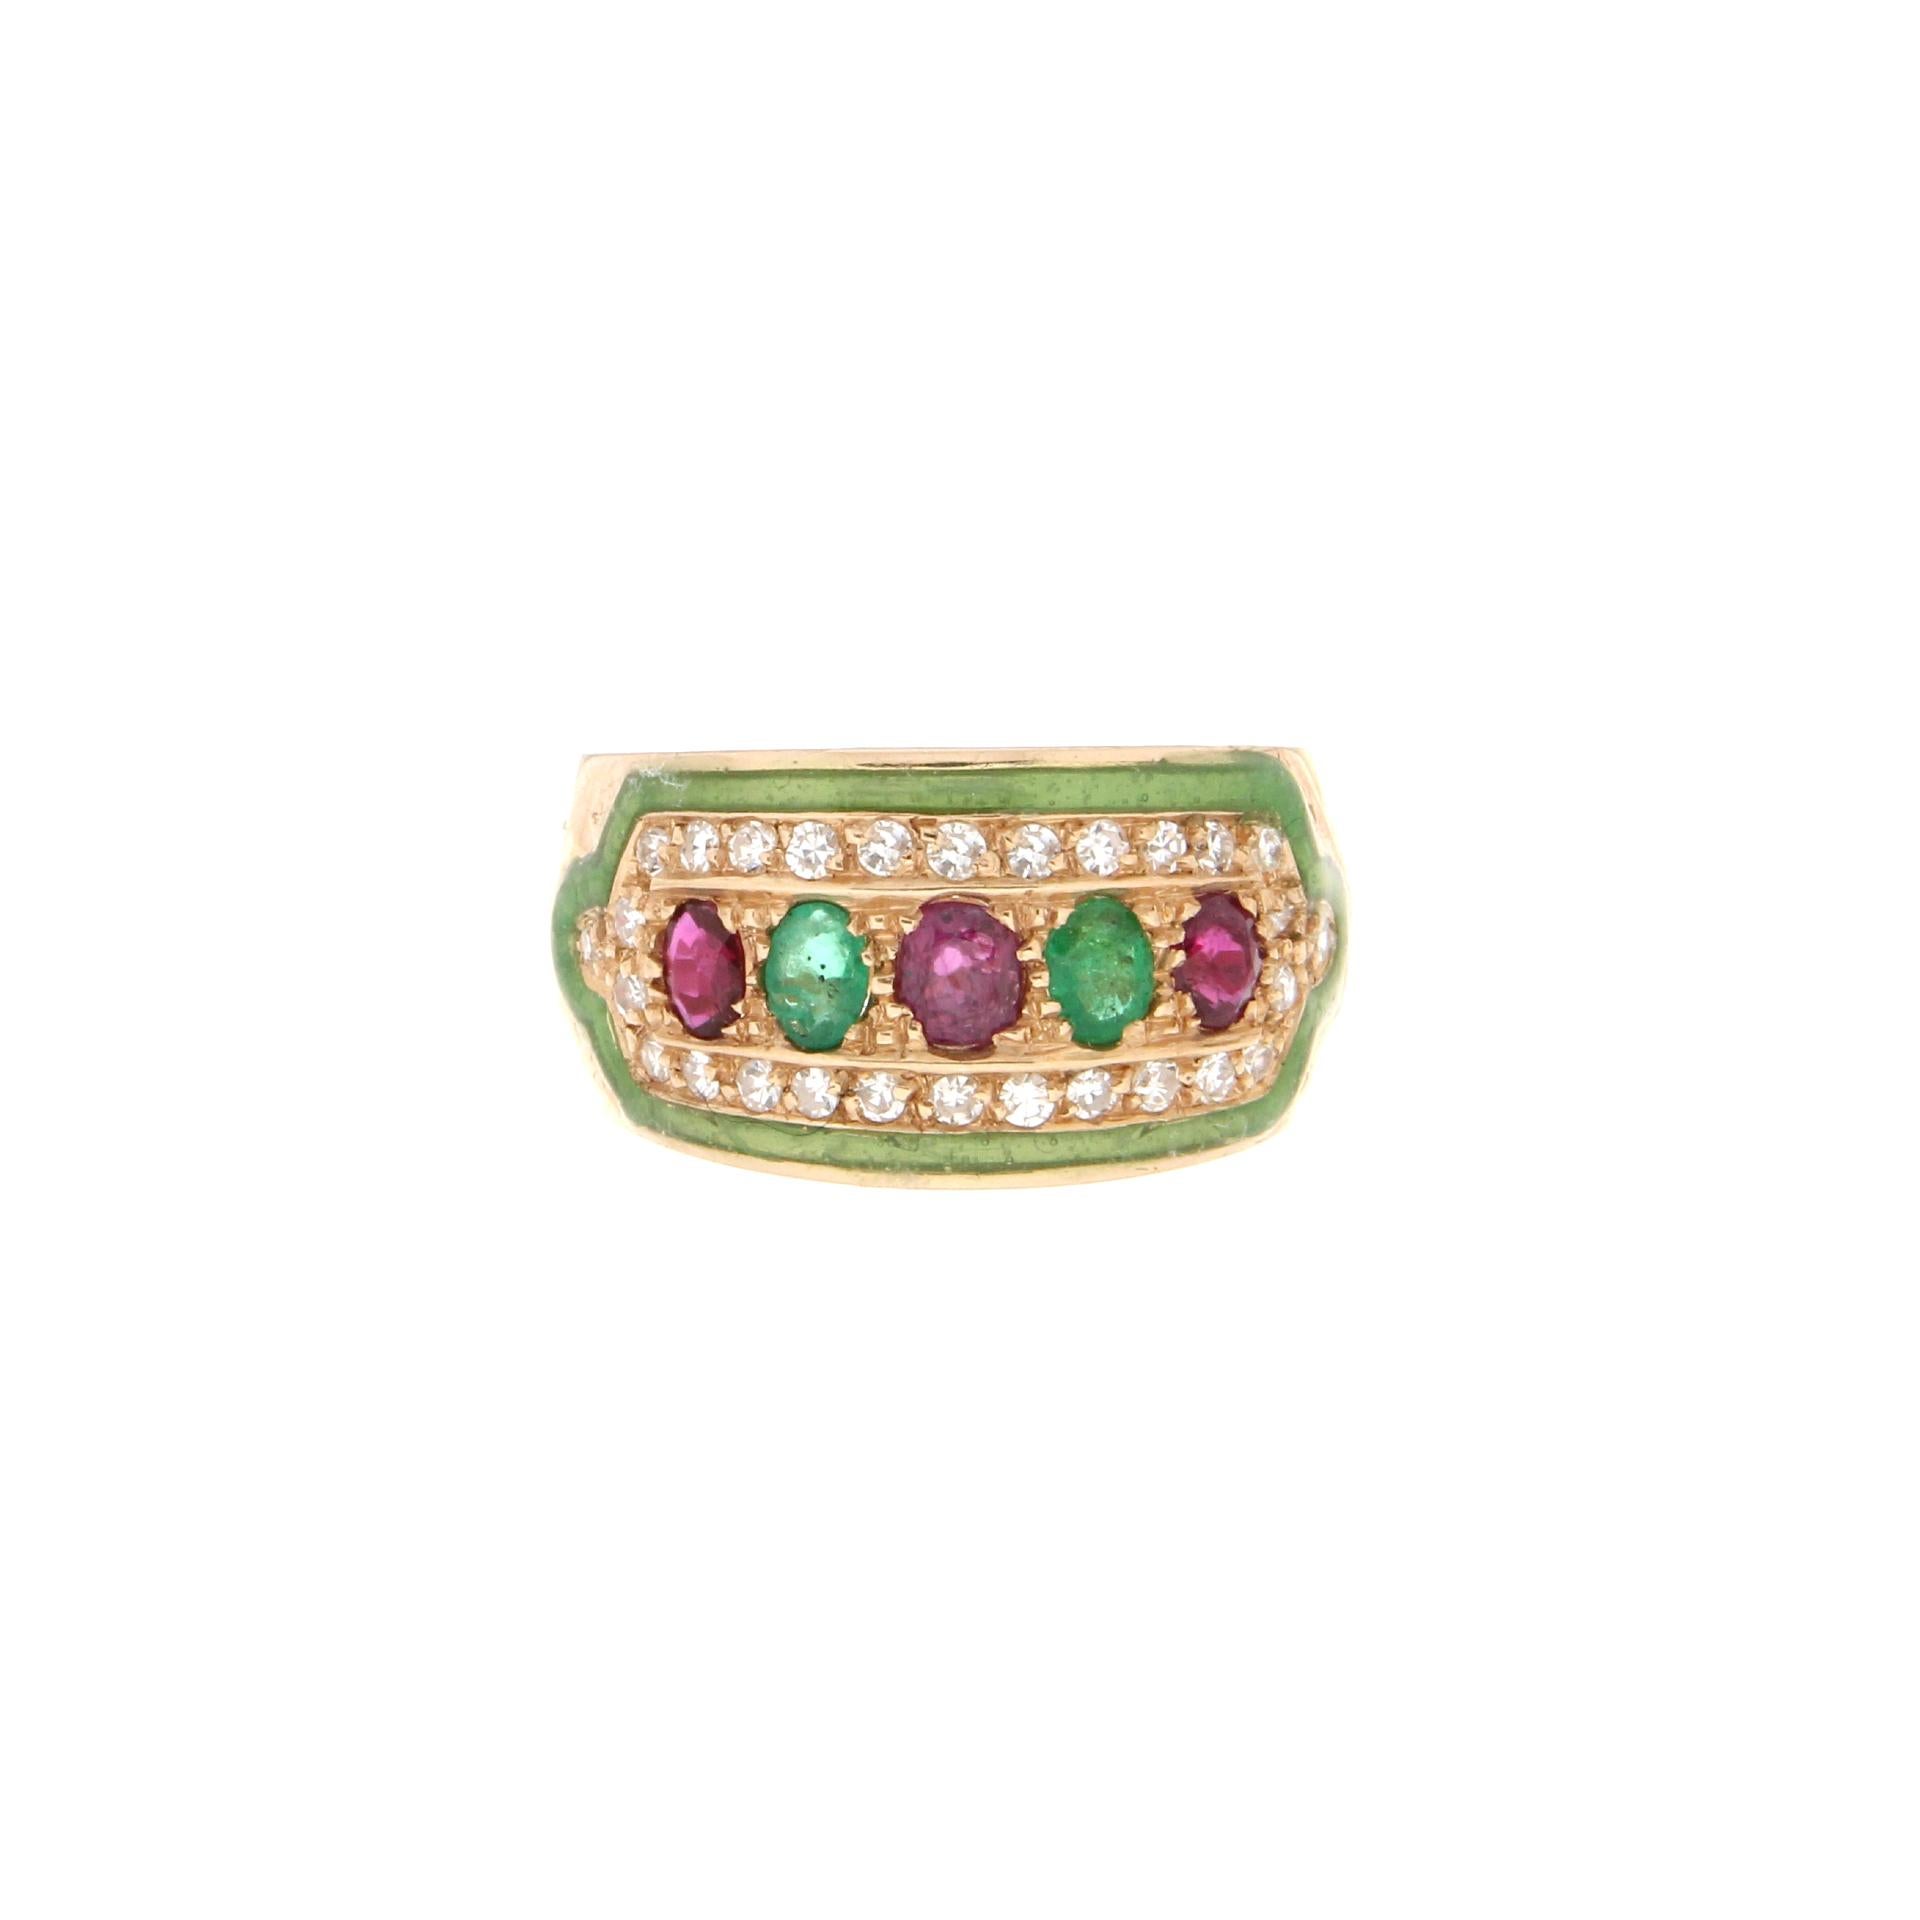 Handcraft Yellow Gold 14 Carats Rubies Emeralds Diamonds Green Enamel Band Ring For Sale 2